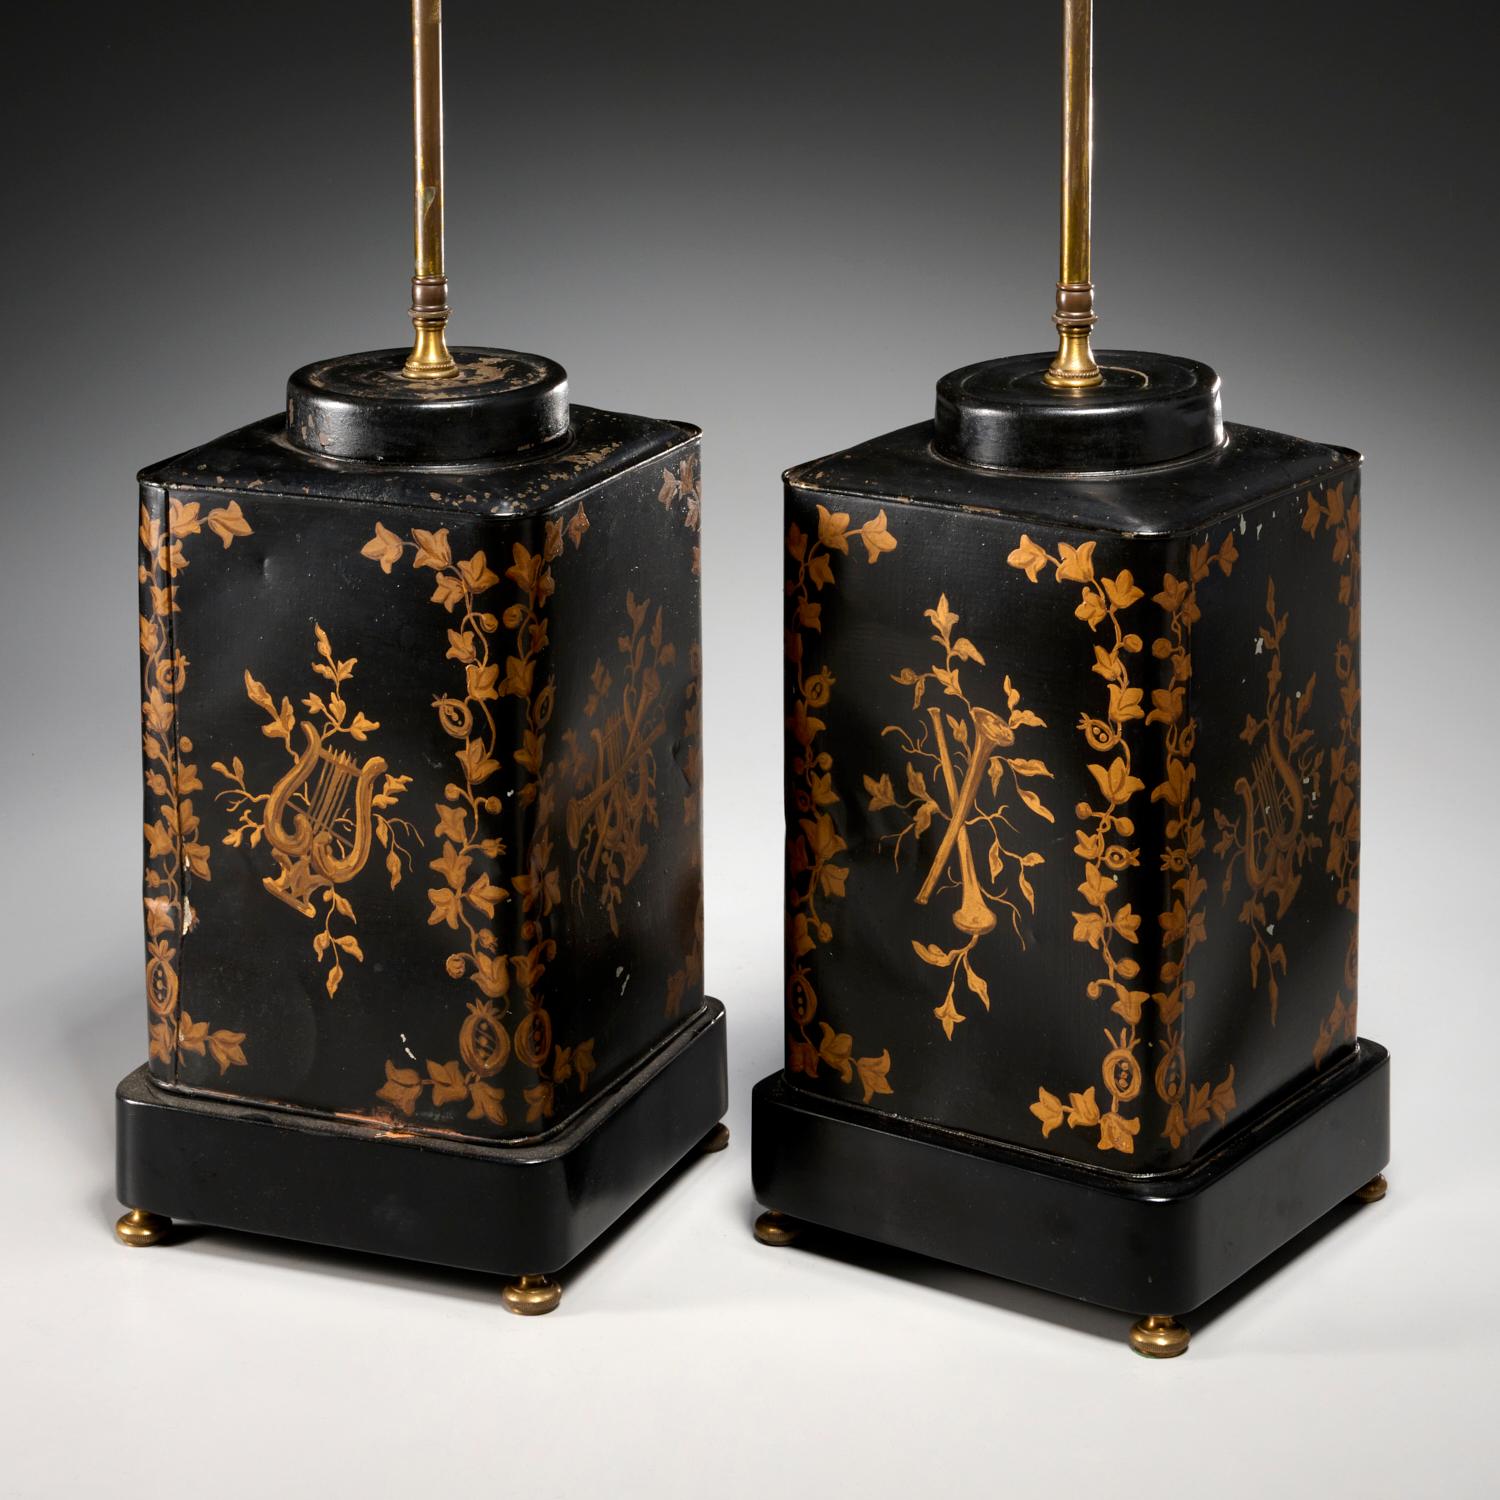 A pair of late 19th c. tea canisters adapted to table lamps each with 3 bulb sockets. With gold painted decorated black enameled metal, each rectangular canister is decorated with bugles and lyres framed by foliate band. Each has an issuing brass